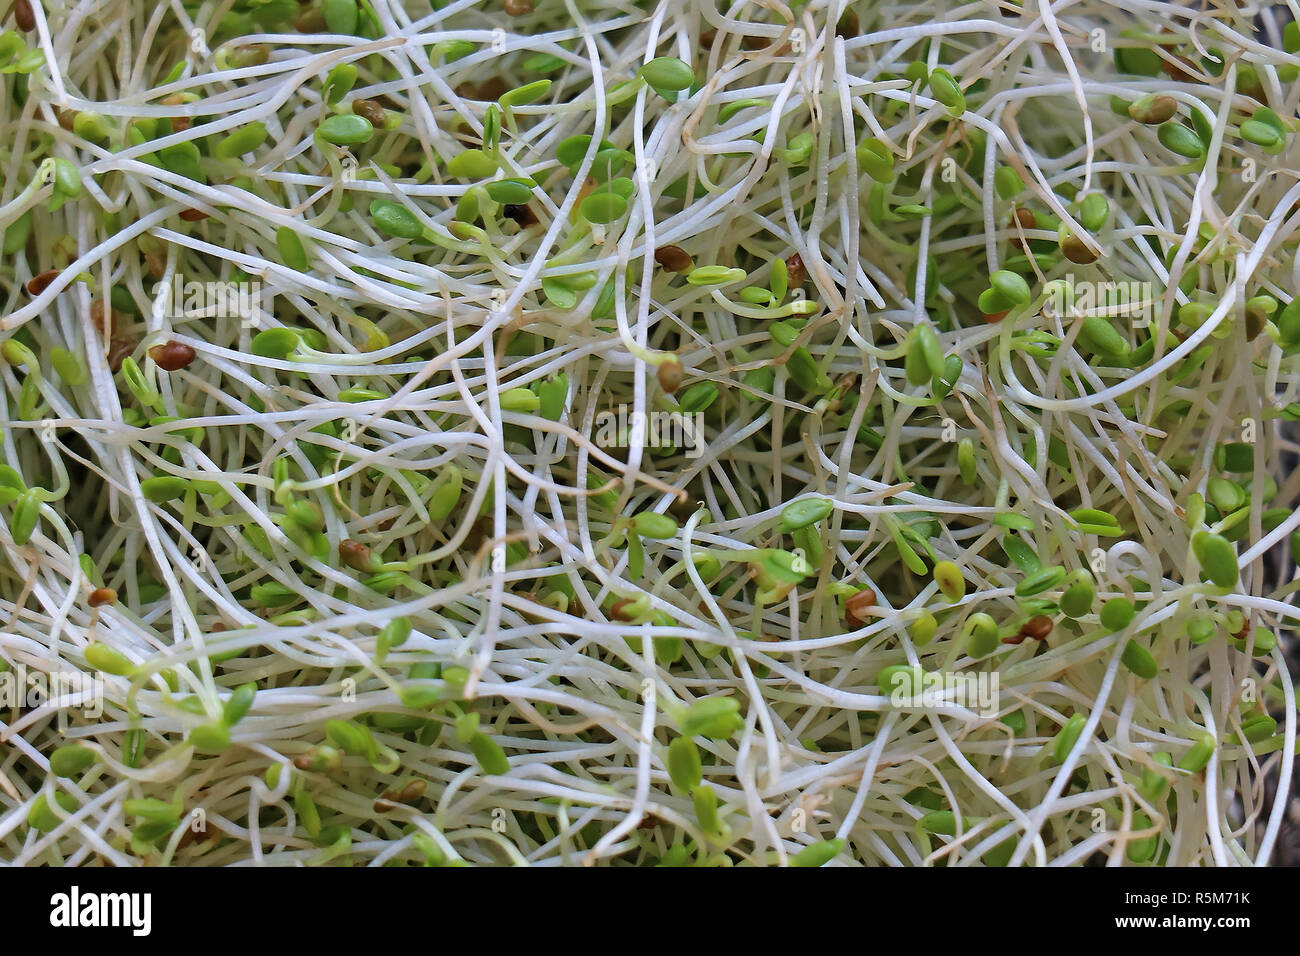 Organic alfalfa sprouts flowering plant in legume family pile background Stock Photo